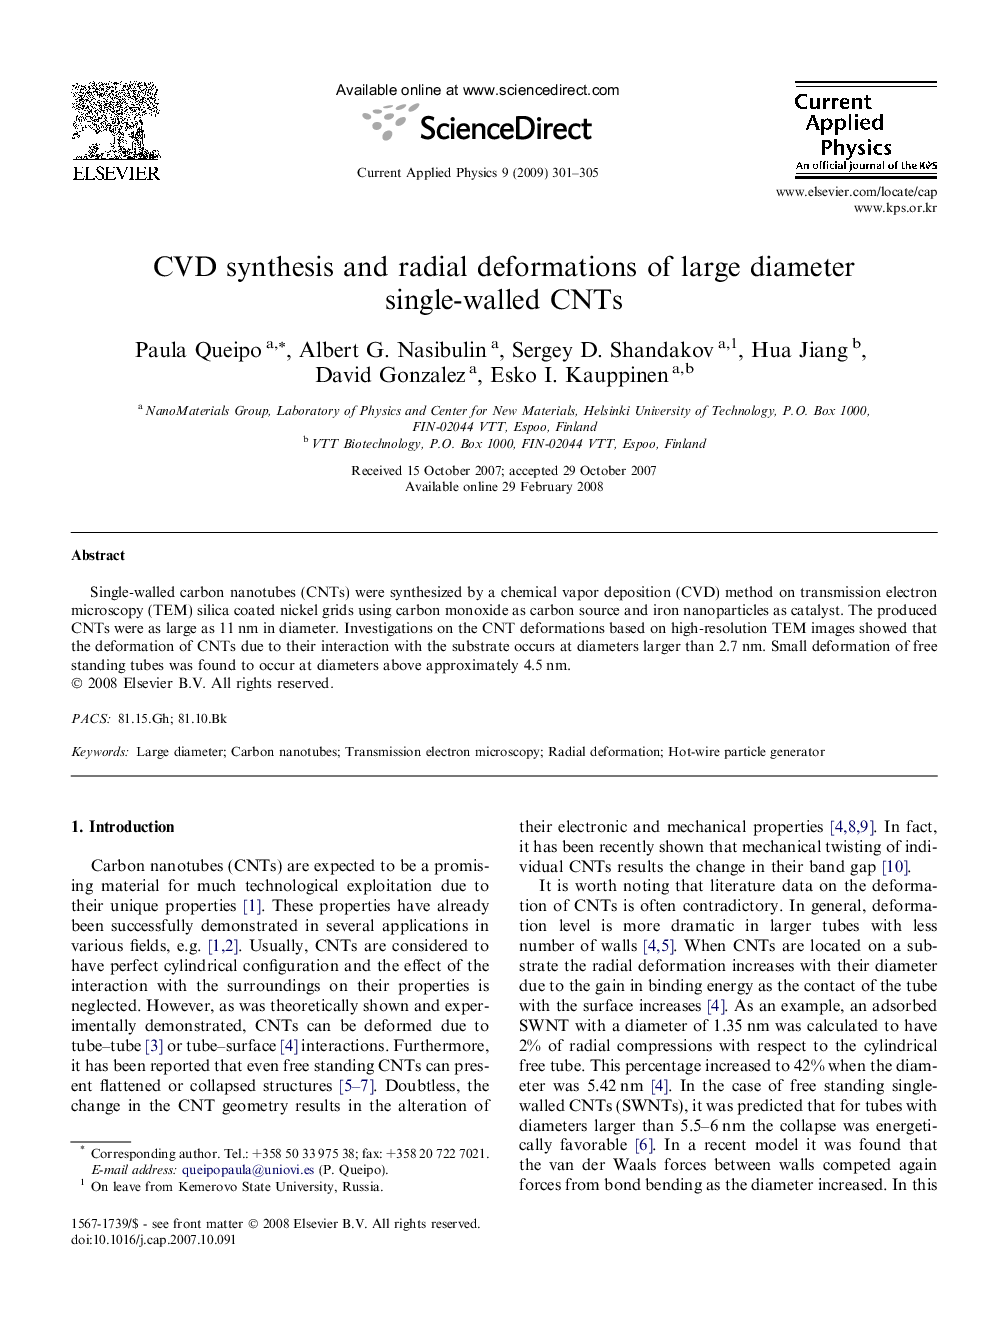 CVD synthesis and radial deformations of large diameter single-walled CNTs